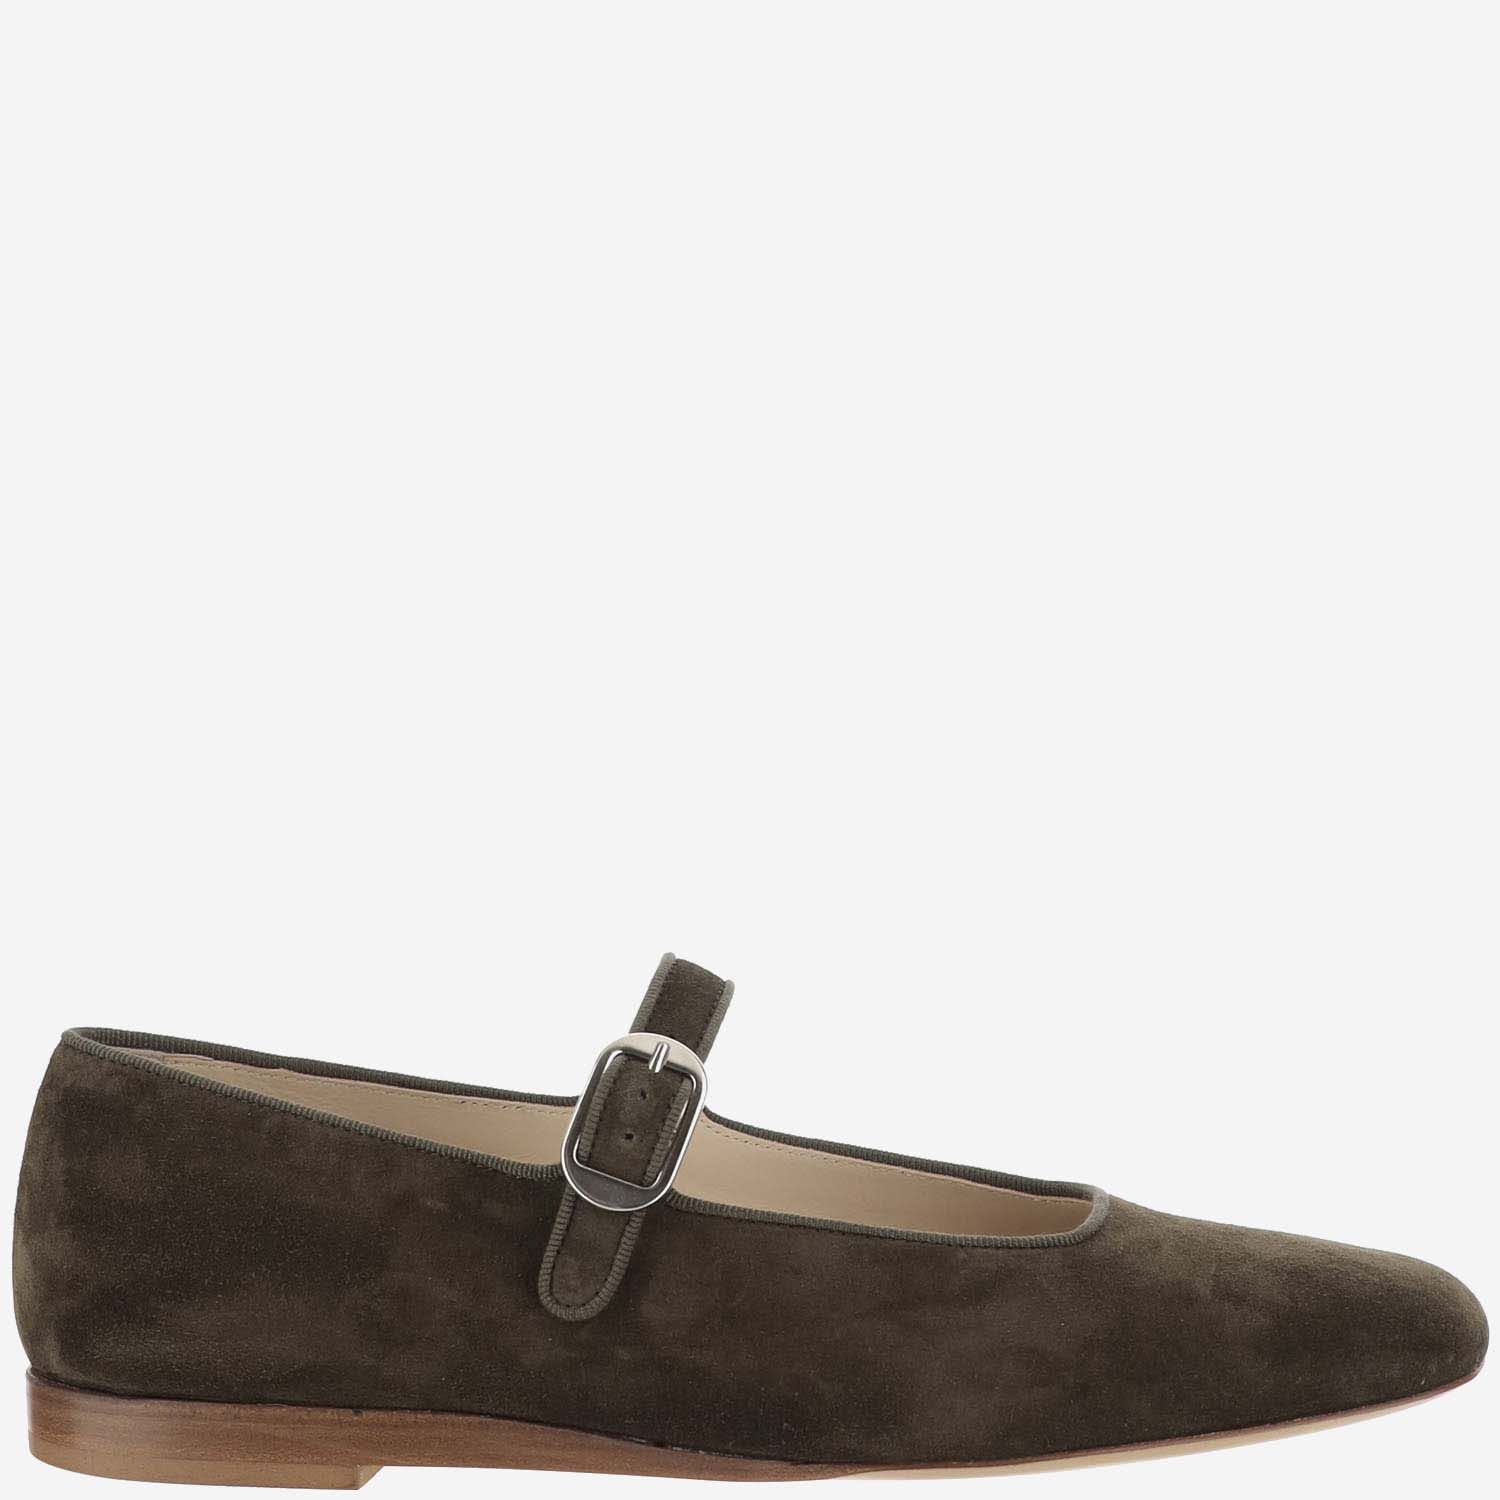 Suede Leather Mary Jane Ballet Flats